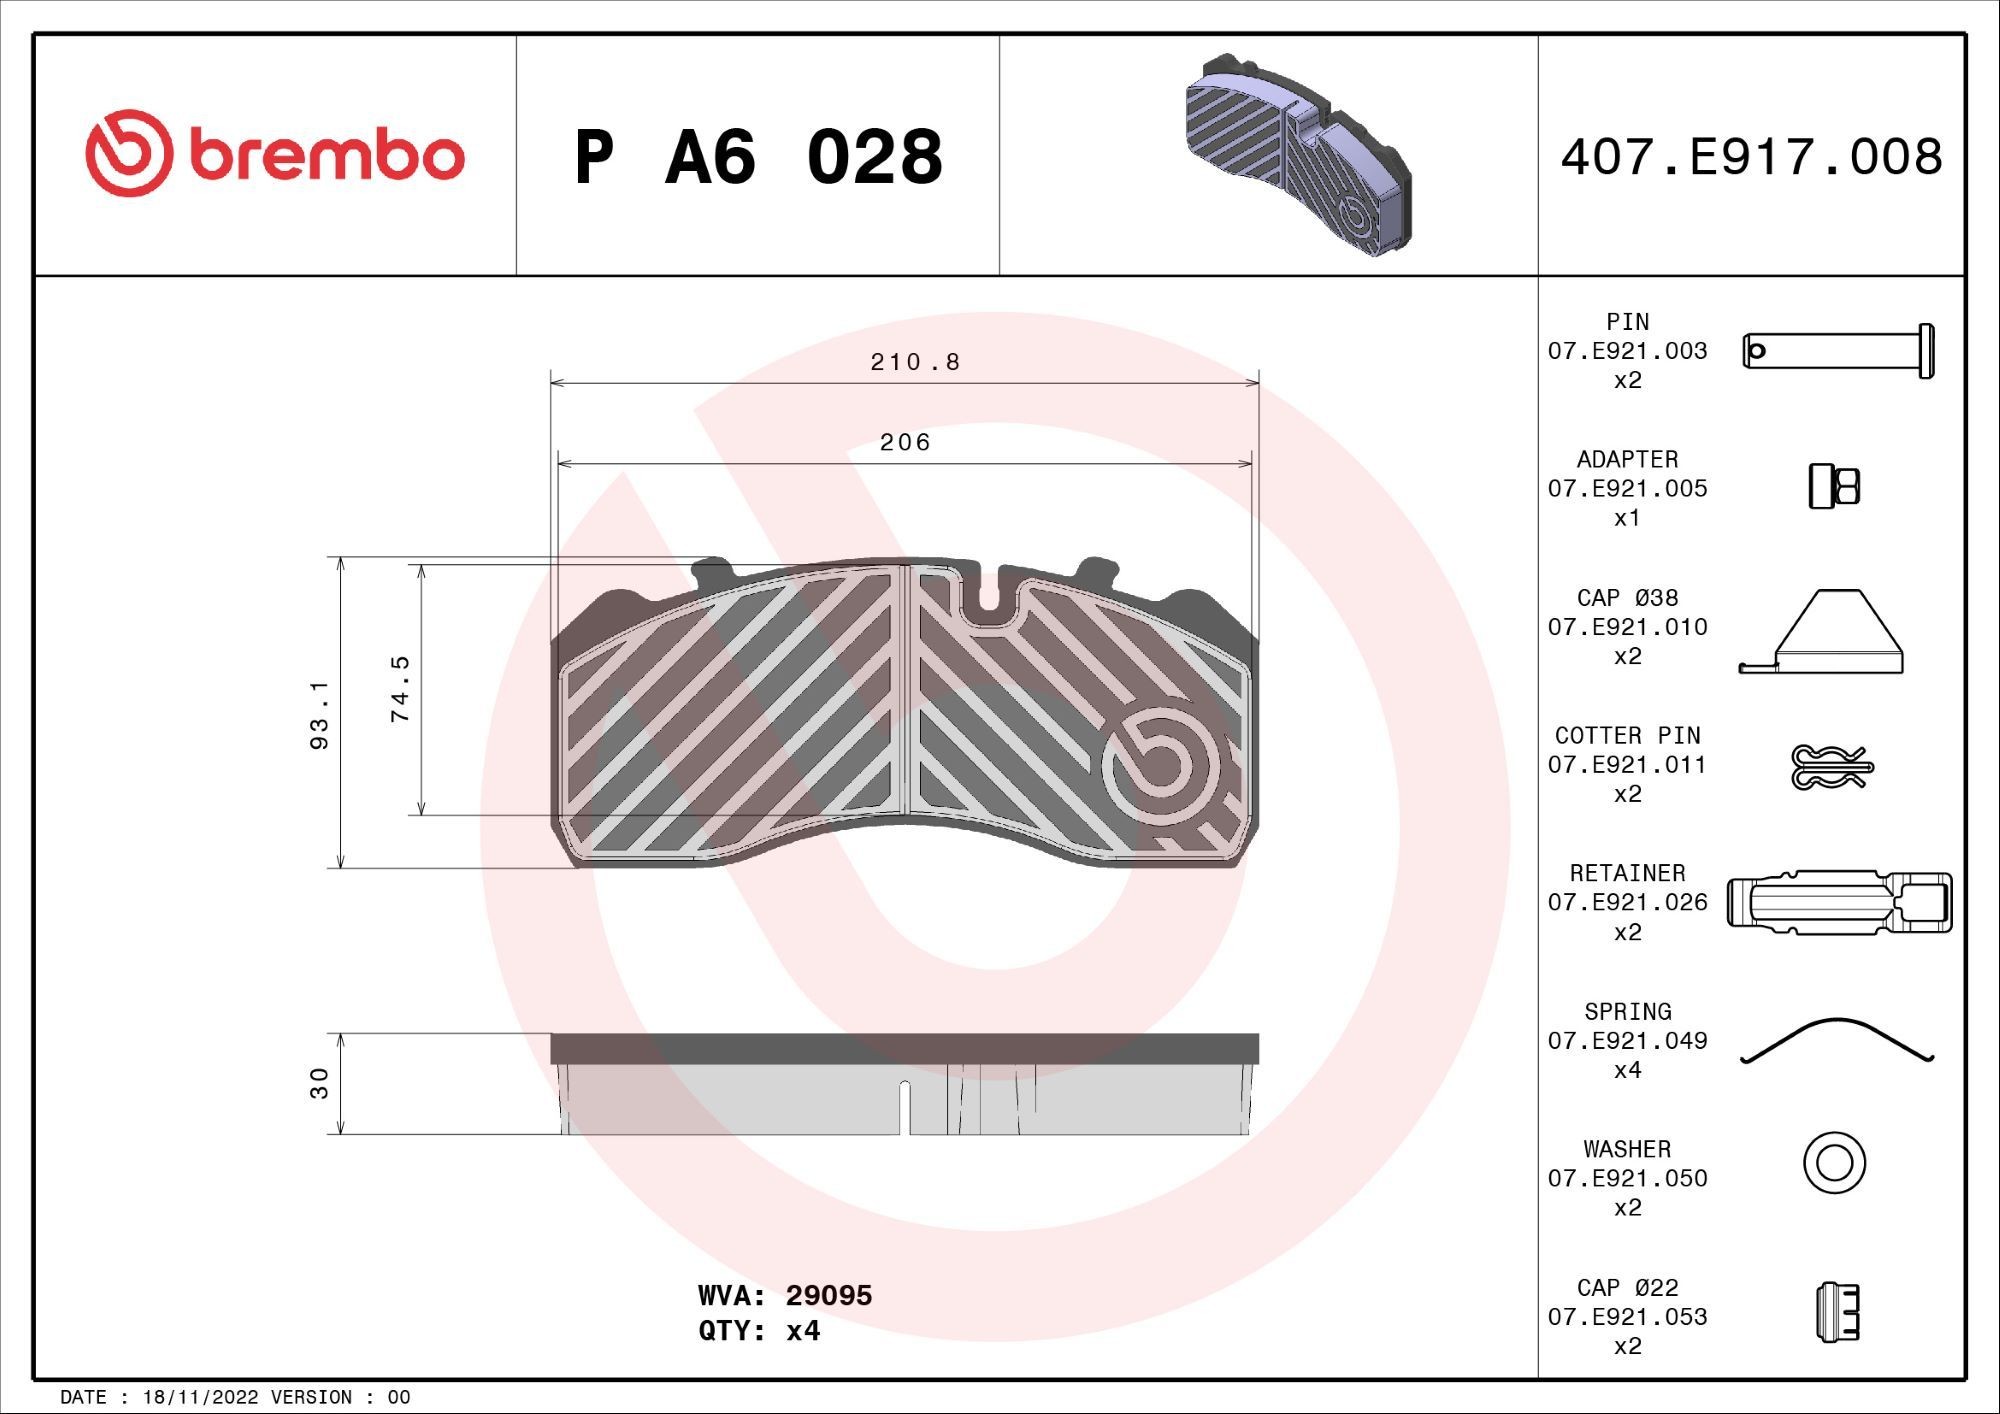 BREMBO prepared for wear indicator, with accessories Height: 93mm, Width: 211mm, Thickness: 30mm Brake pads P A6 028 buy